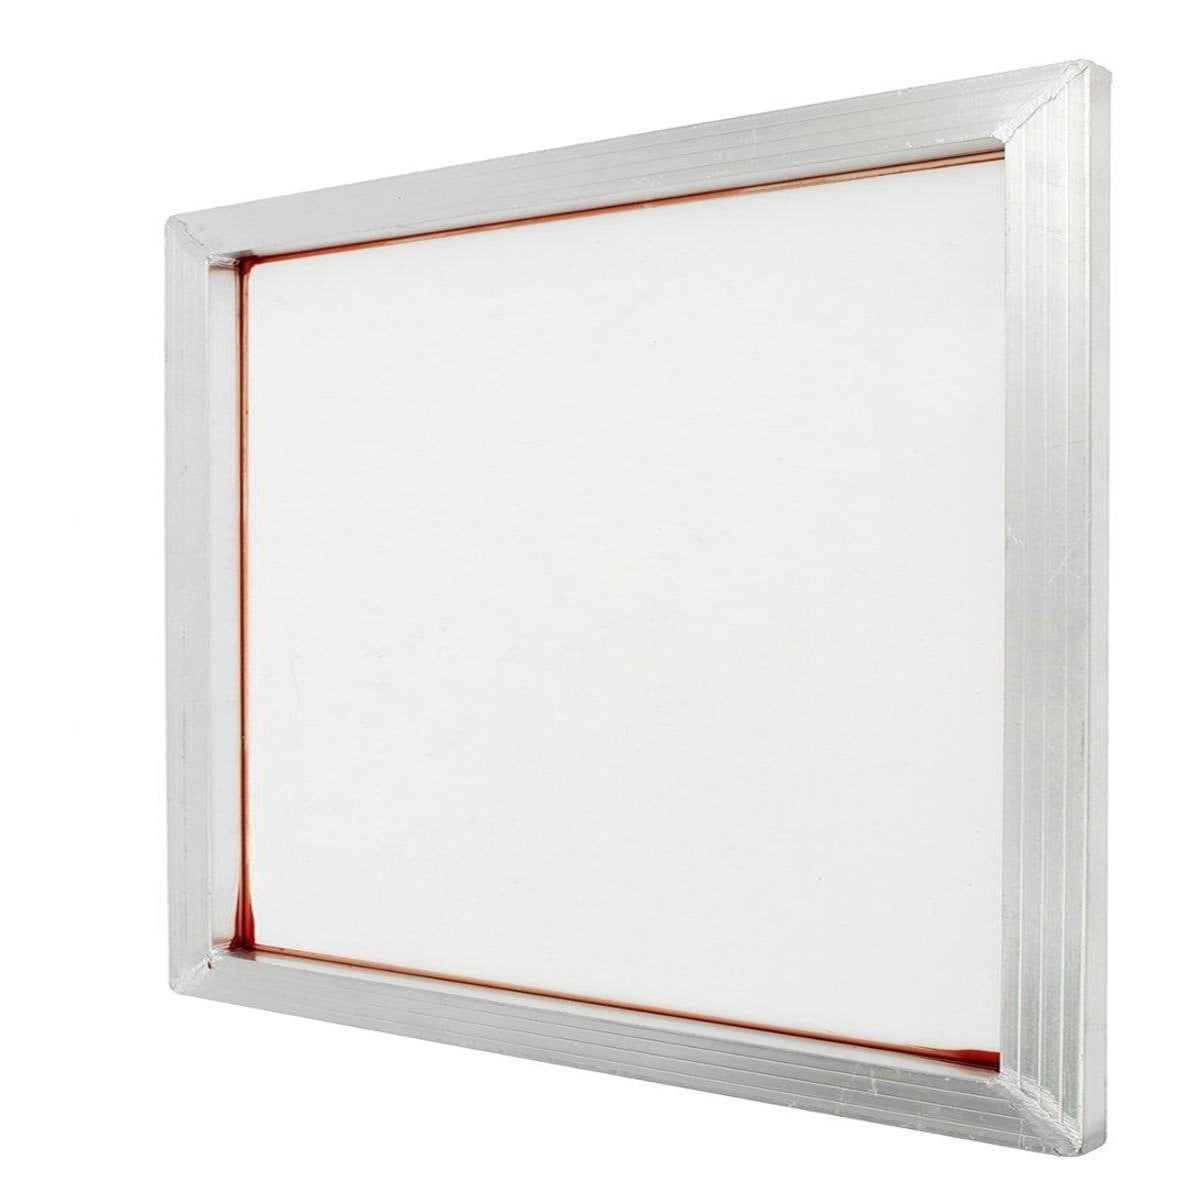 6pack 18" X 20" Aluminum Frame Screen Printing Screens With 110 White Mesh Count for sale online 